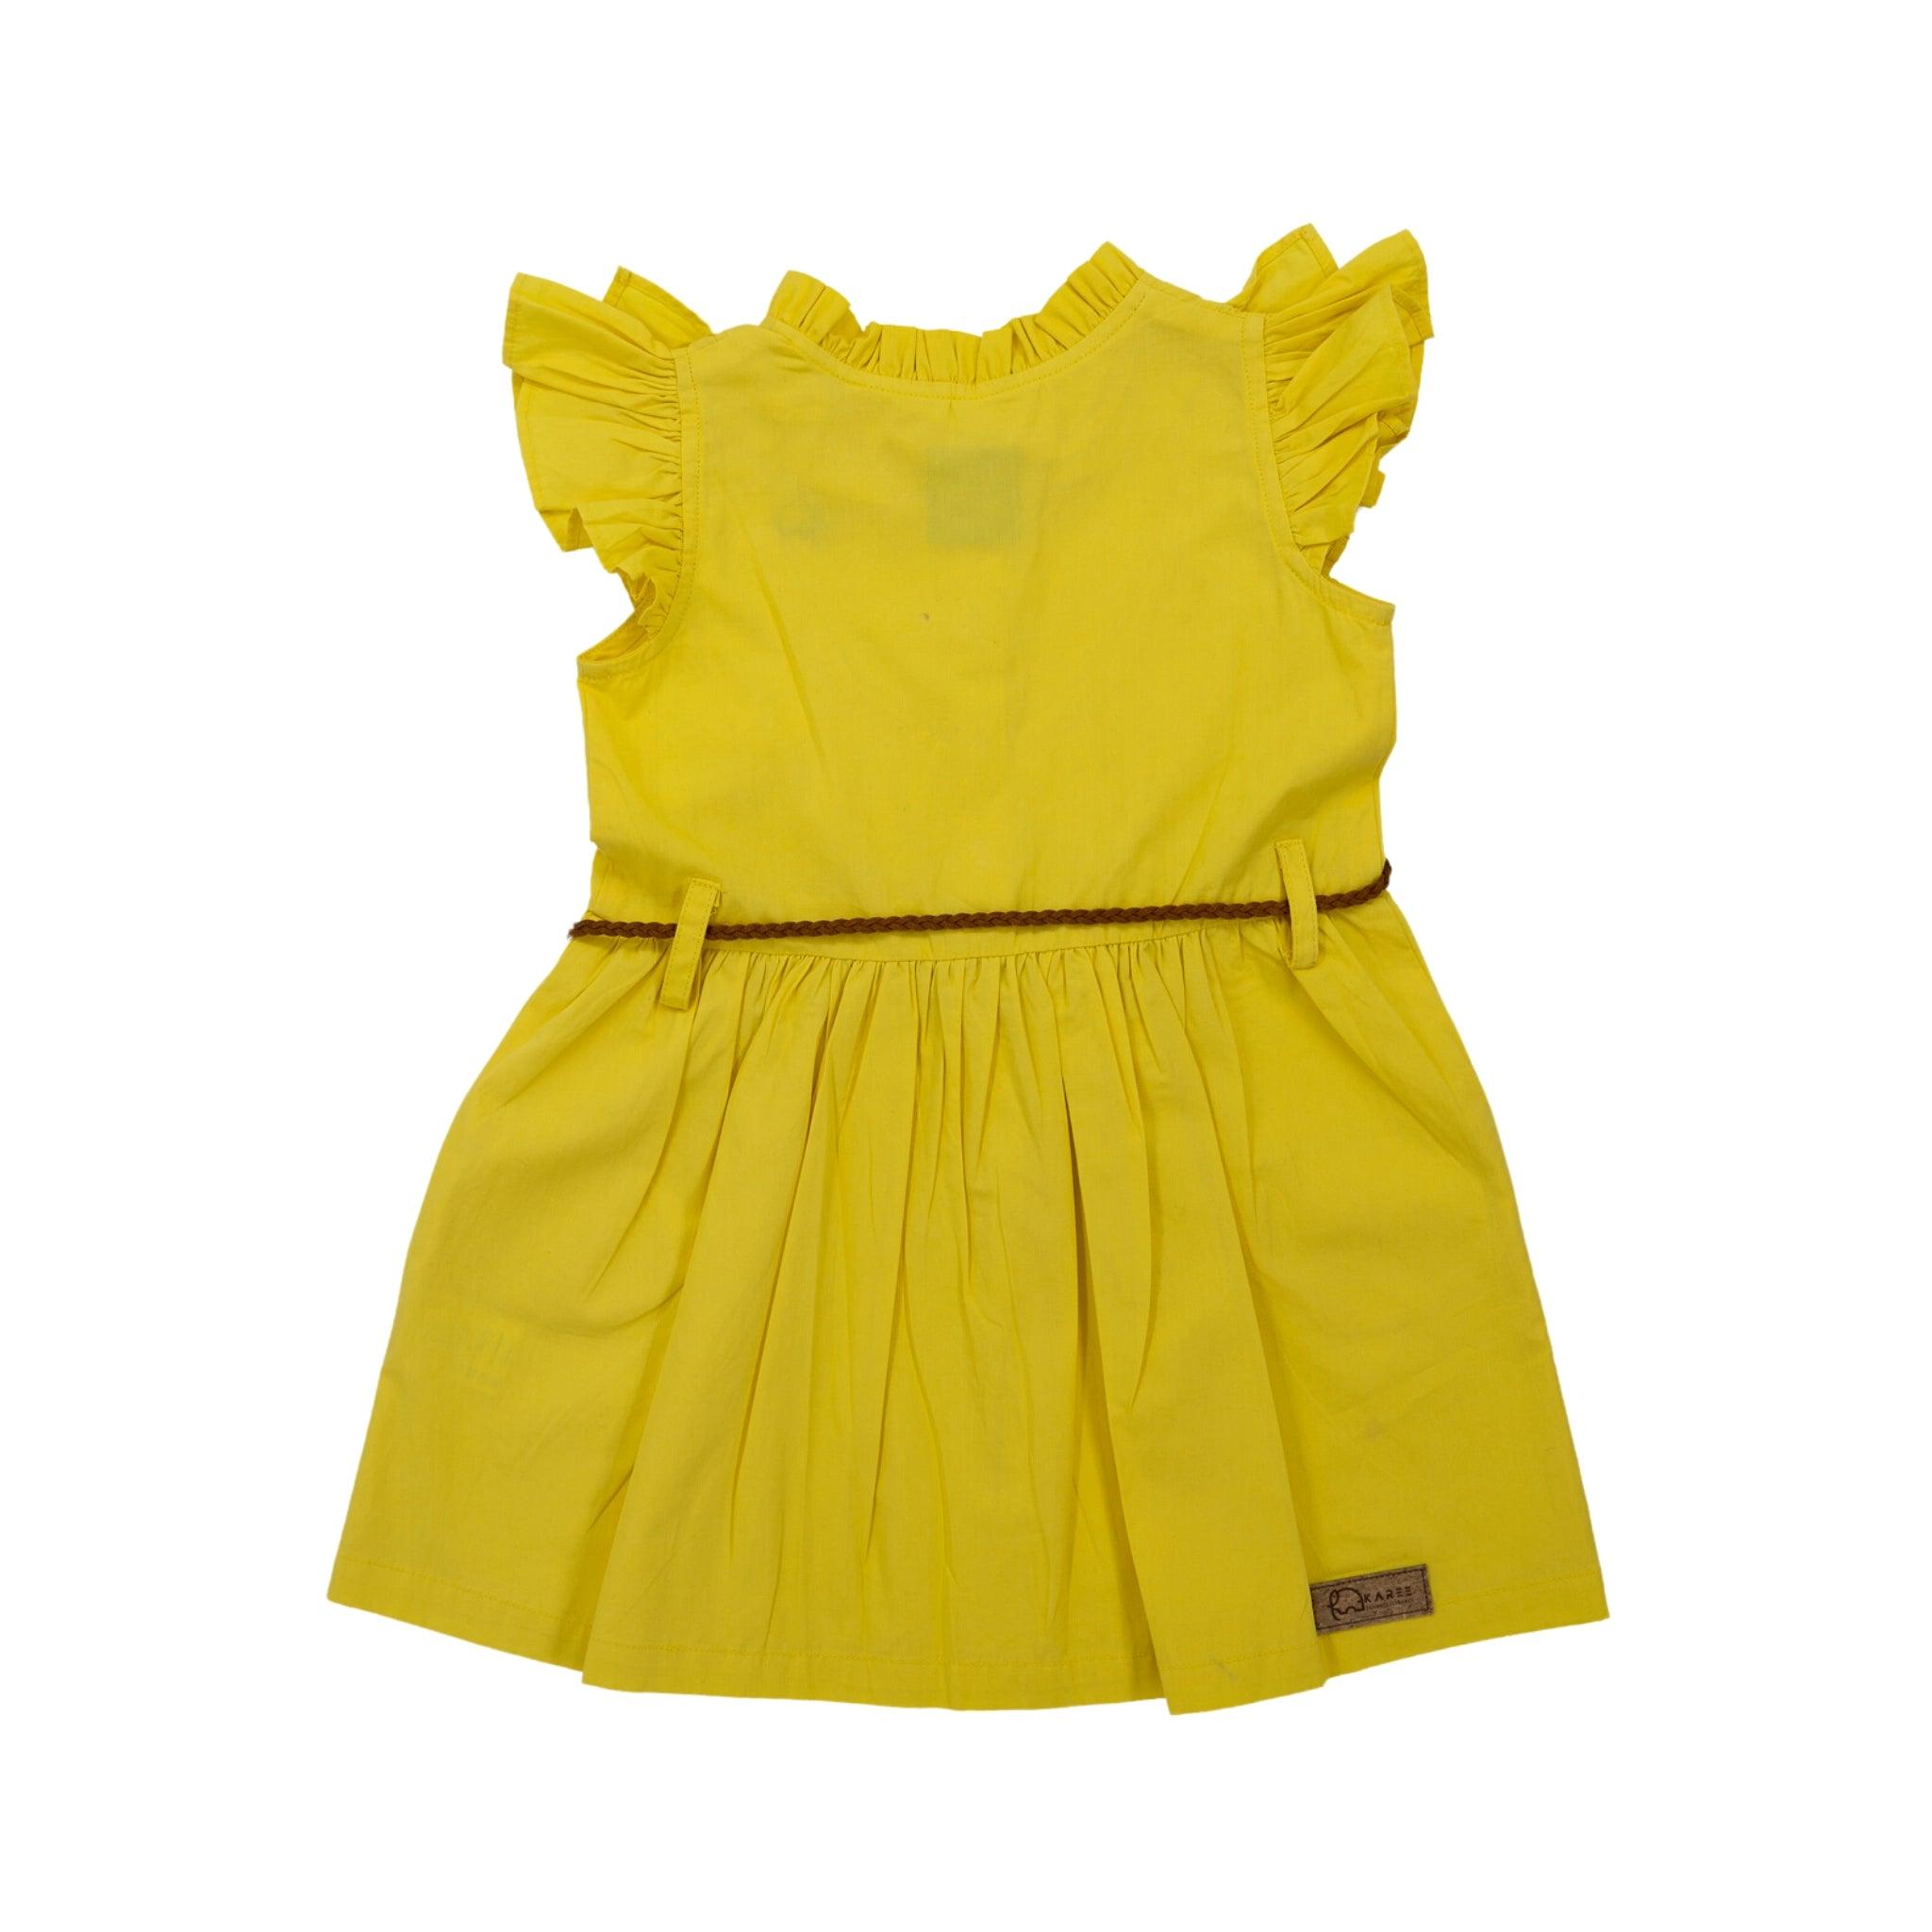 Yellow Karee toddler cotton dress with butterfly sleeves and a brown belt, displayed against a plain white background.